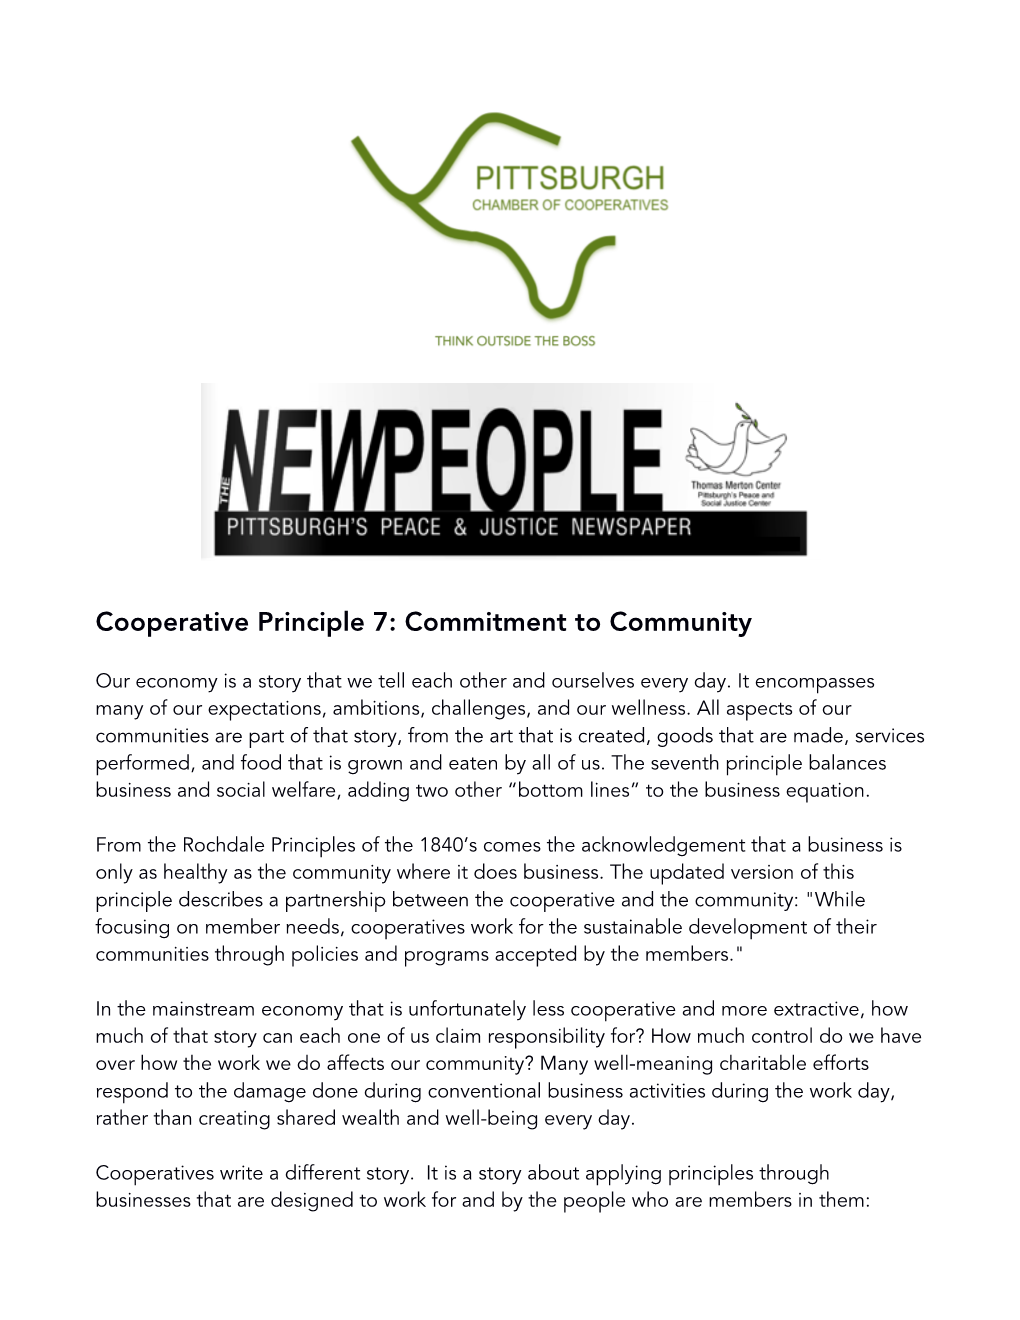 COOP Principles No.7 Commitment to Community